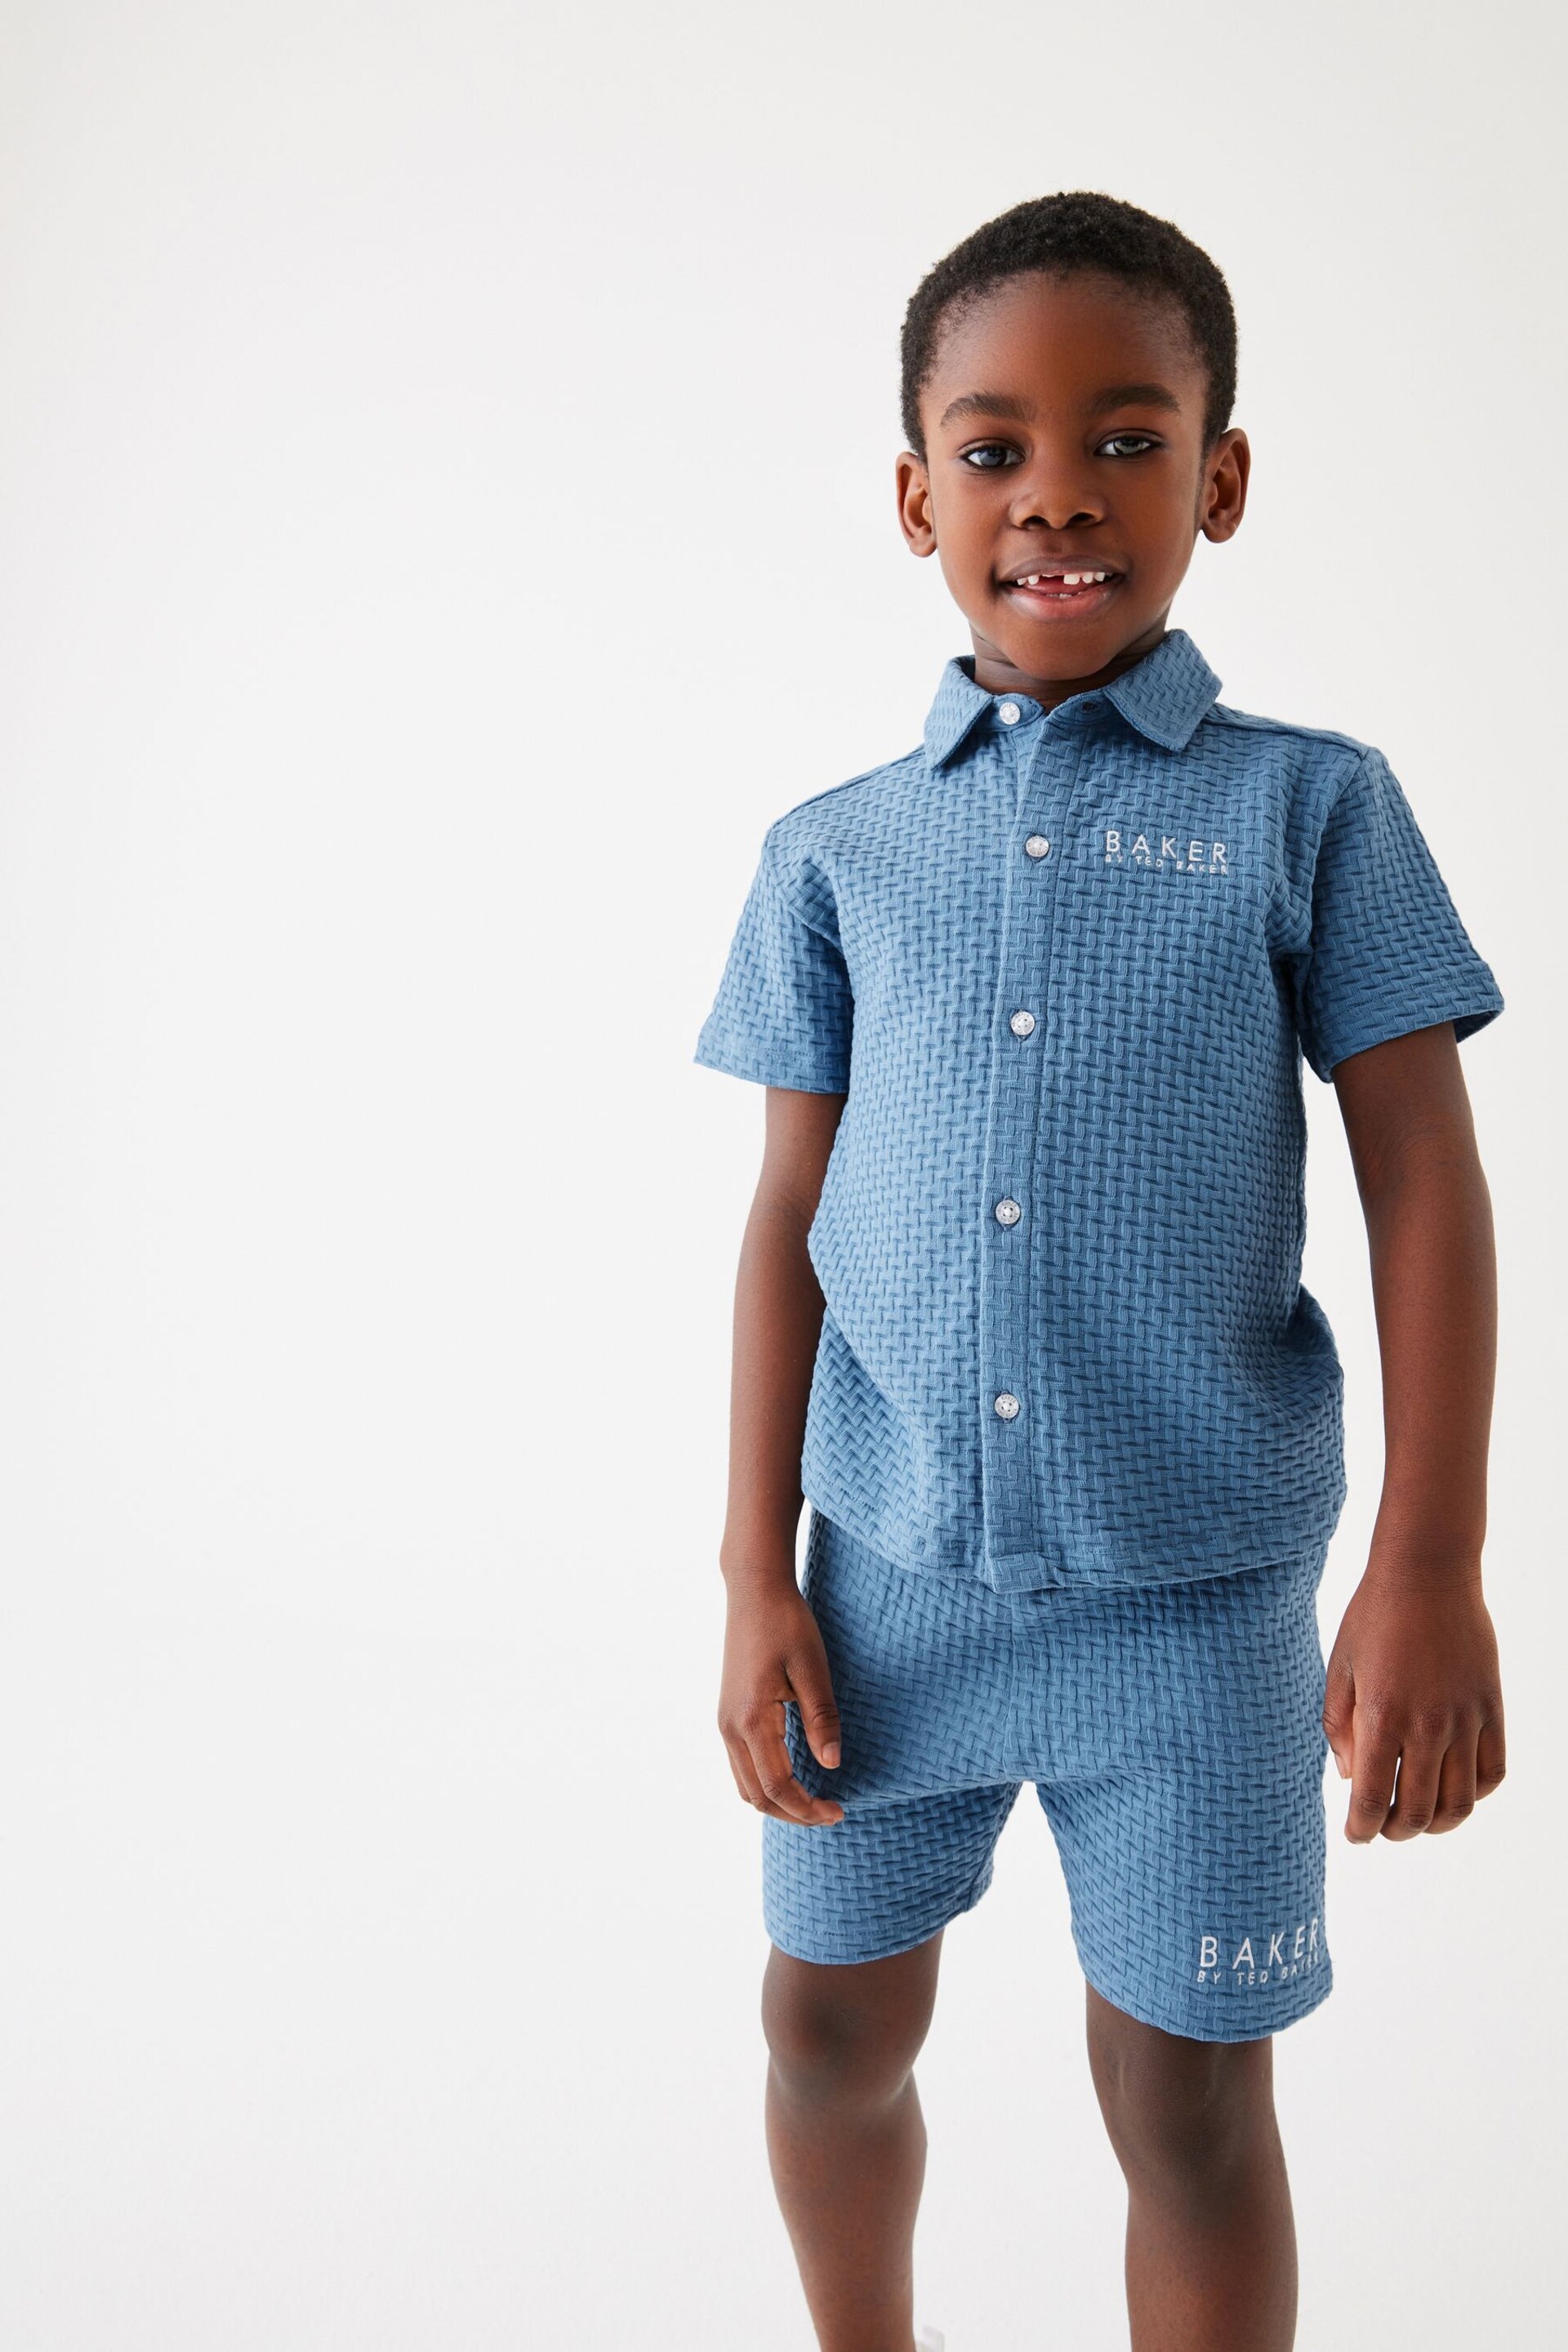 Baker by Ted Baker Textured Polo Shirt and Shorts Set - Image 11 of 14